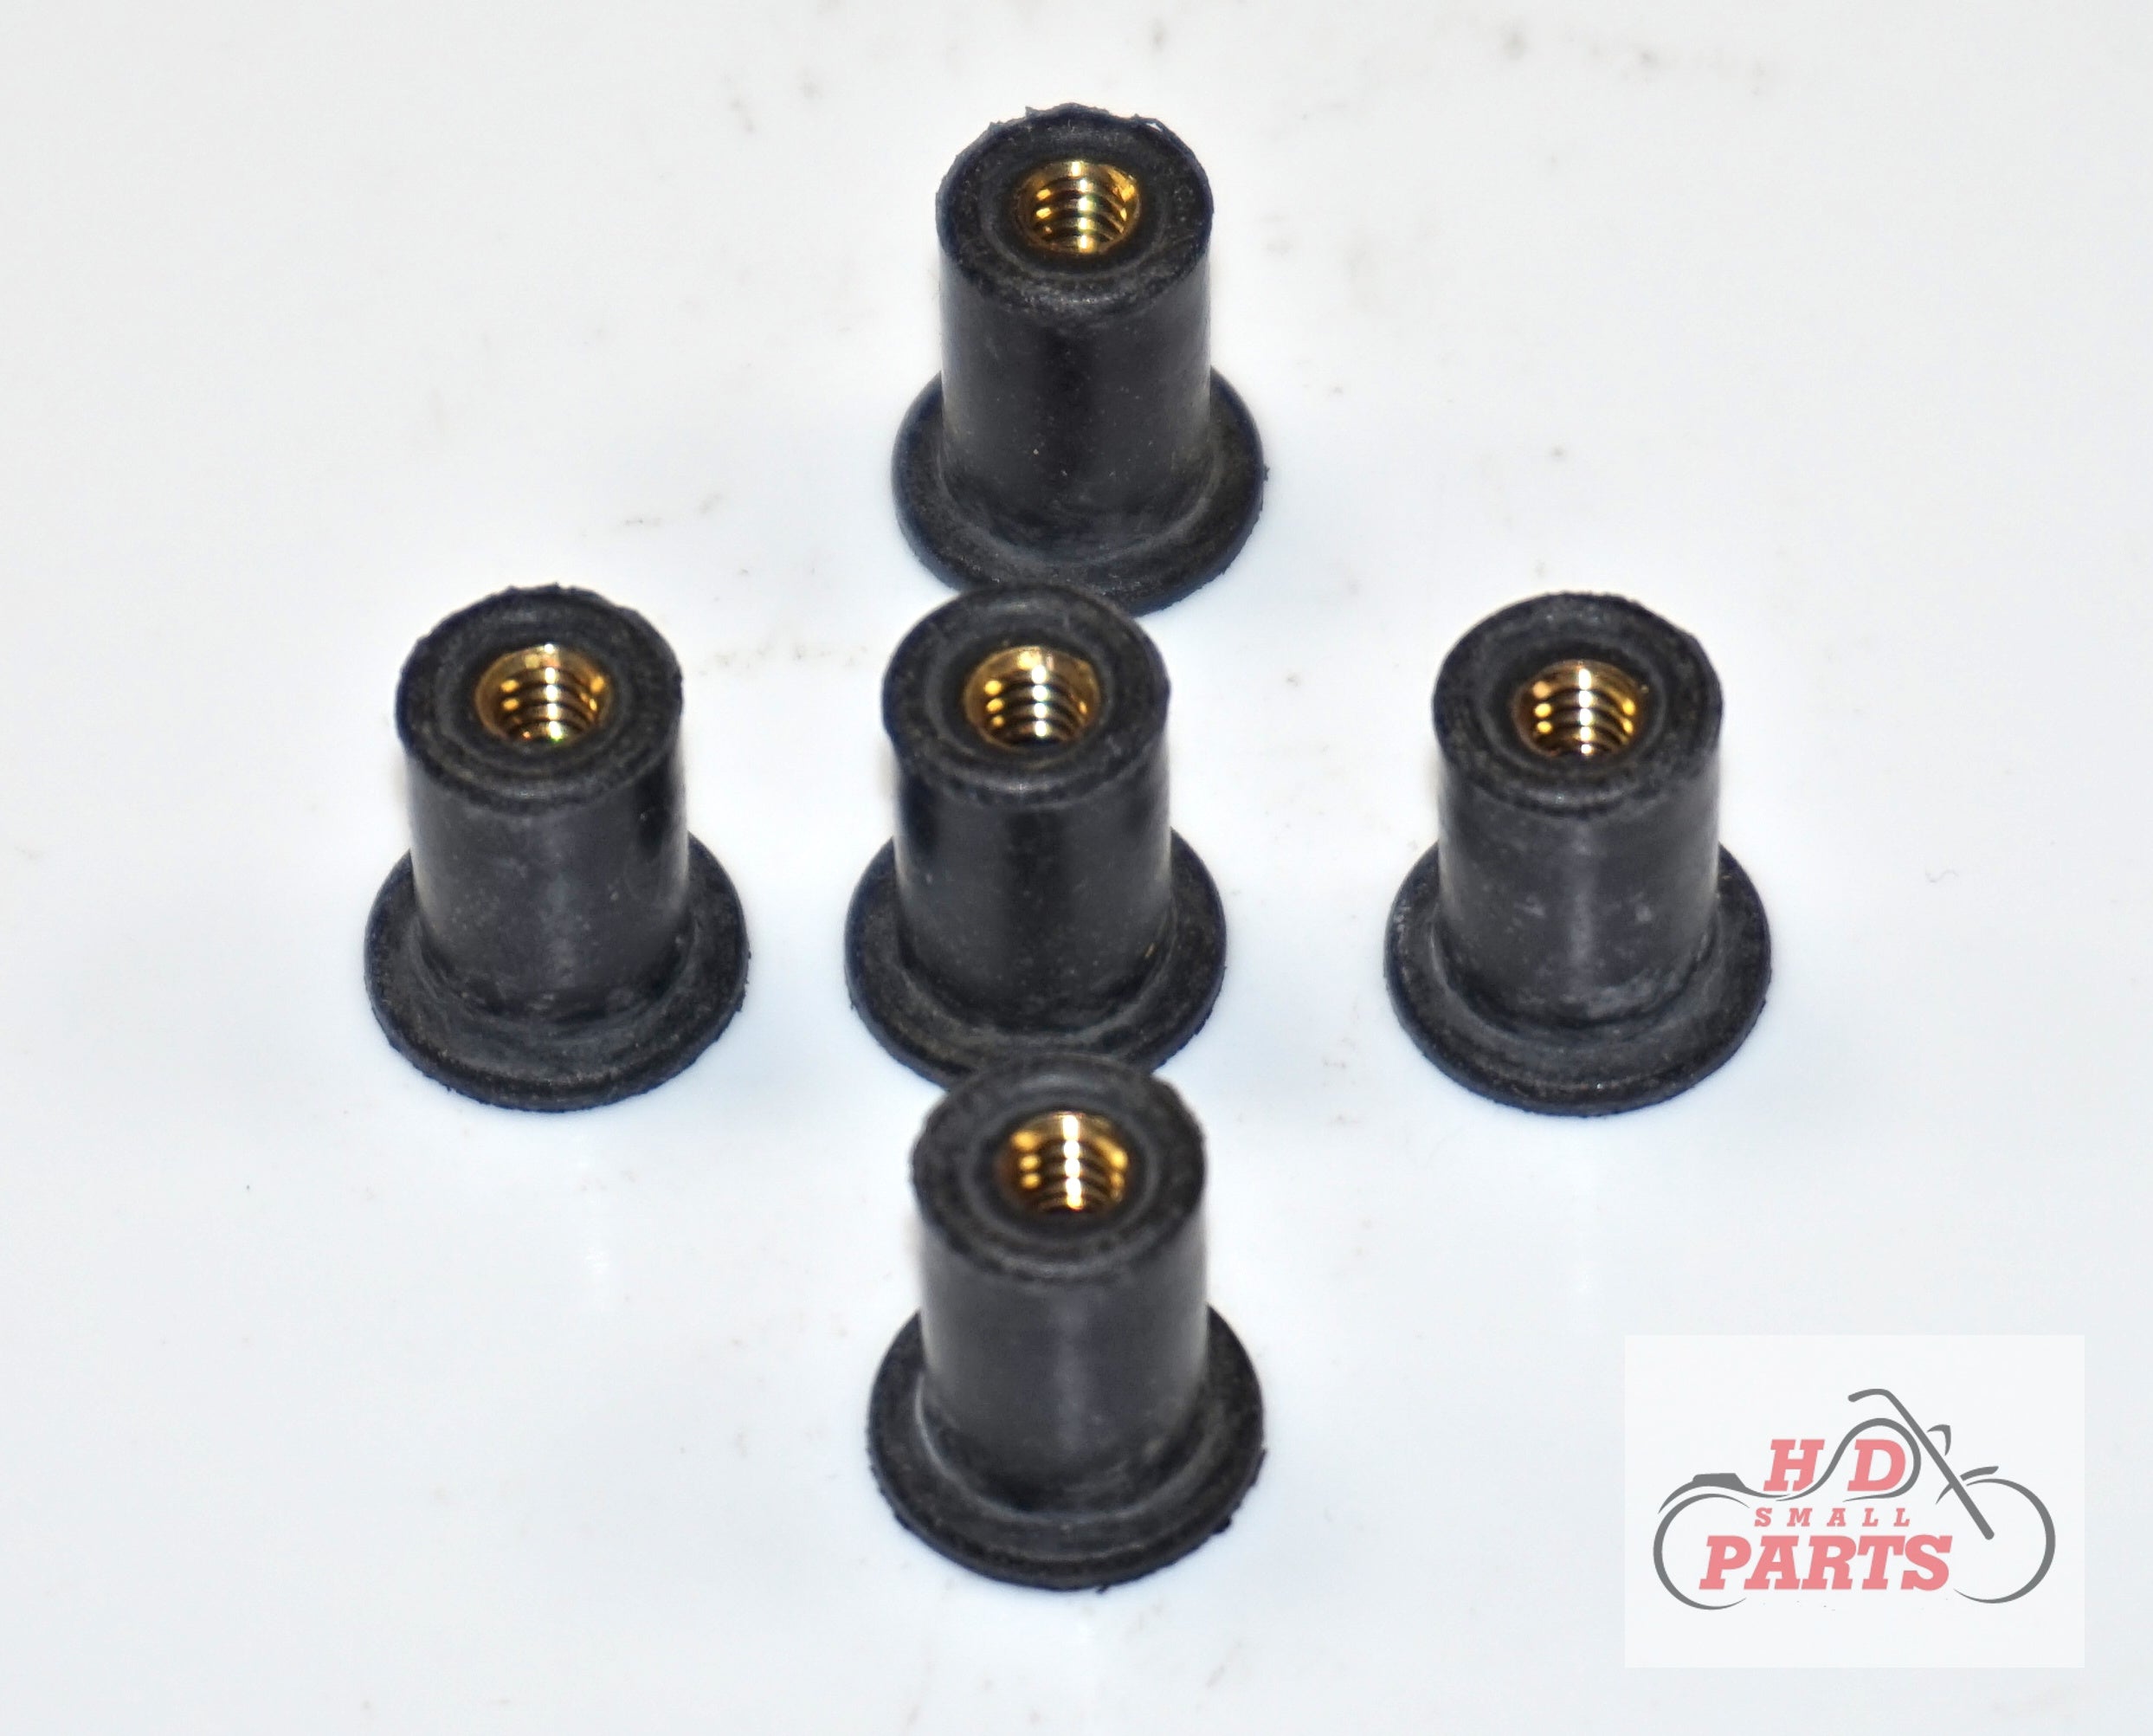 Harley-Davidson Road Glide Replacement Well Nuts H-D part# 2404-0543 (#6-32) LocEzy.com